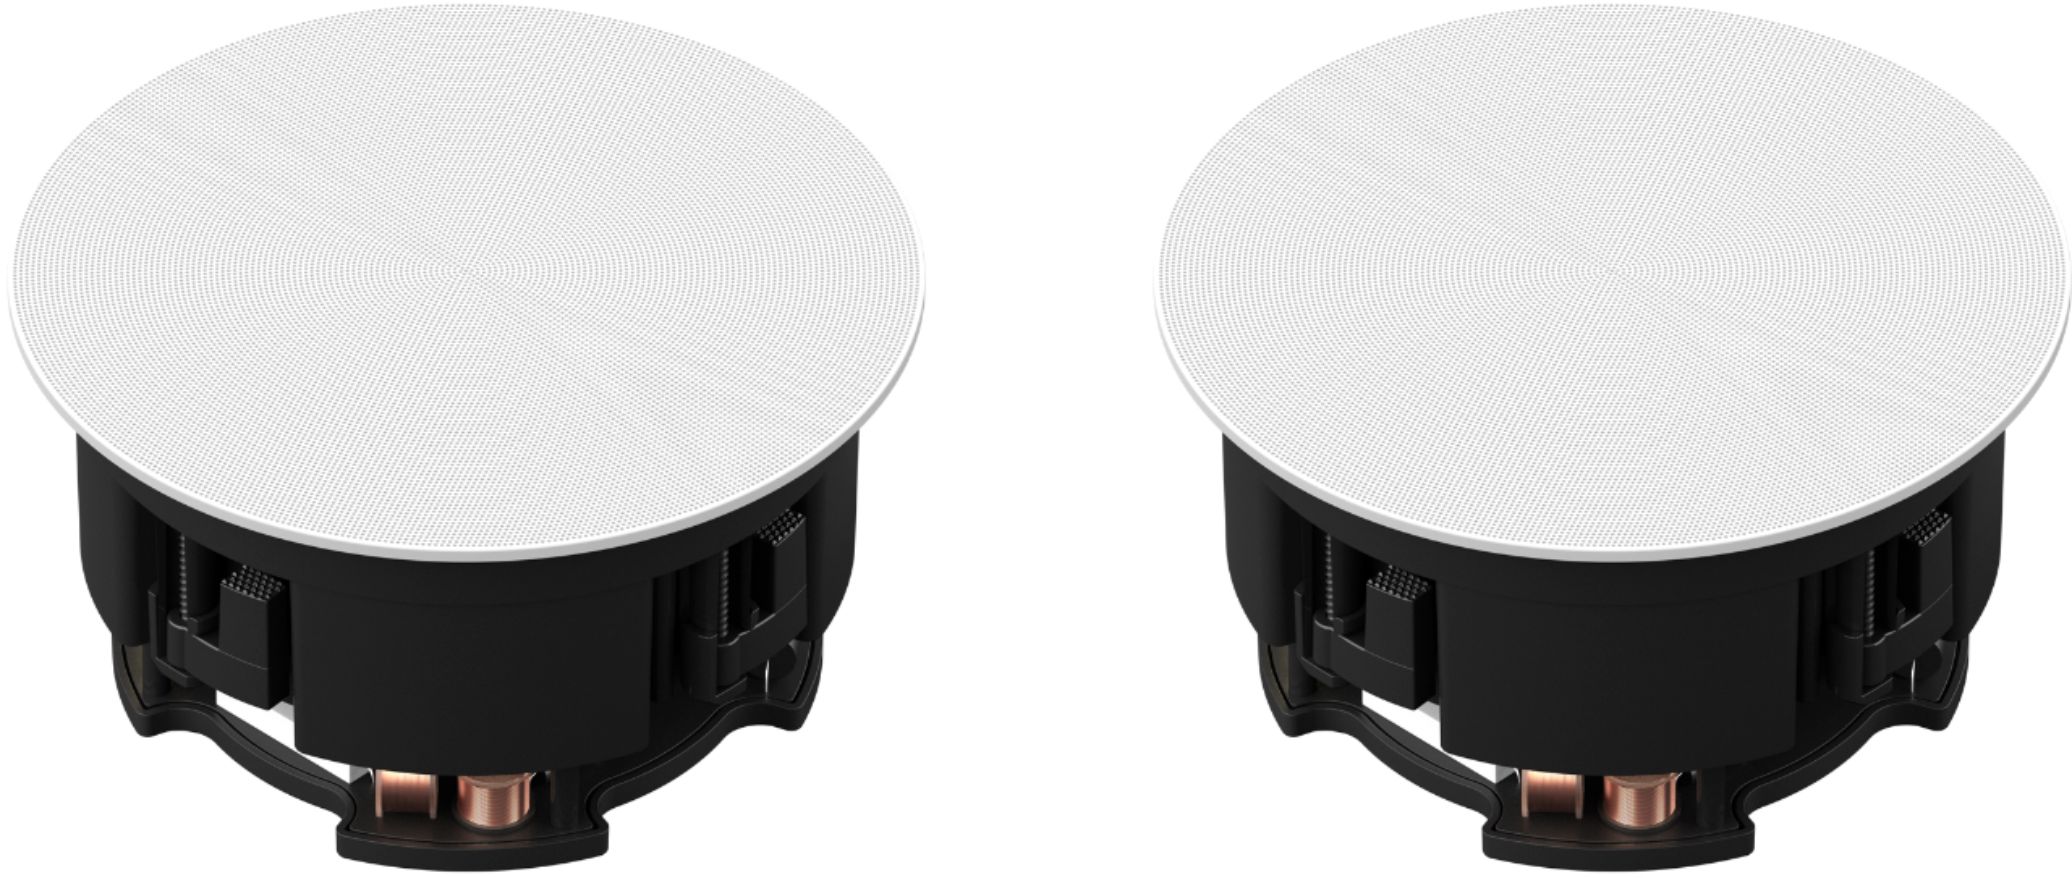 Angle View: Sonos - Architectural 6-1/2" Passive 2-Way In-Ceiling Speakers (Pair) - White